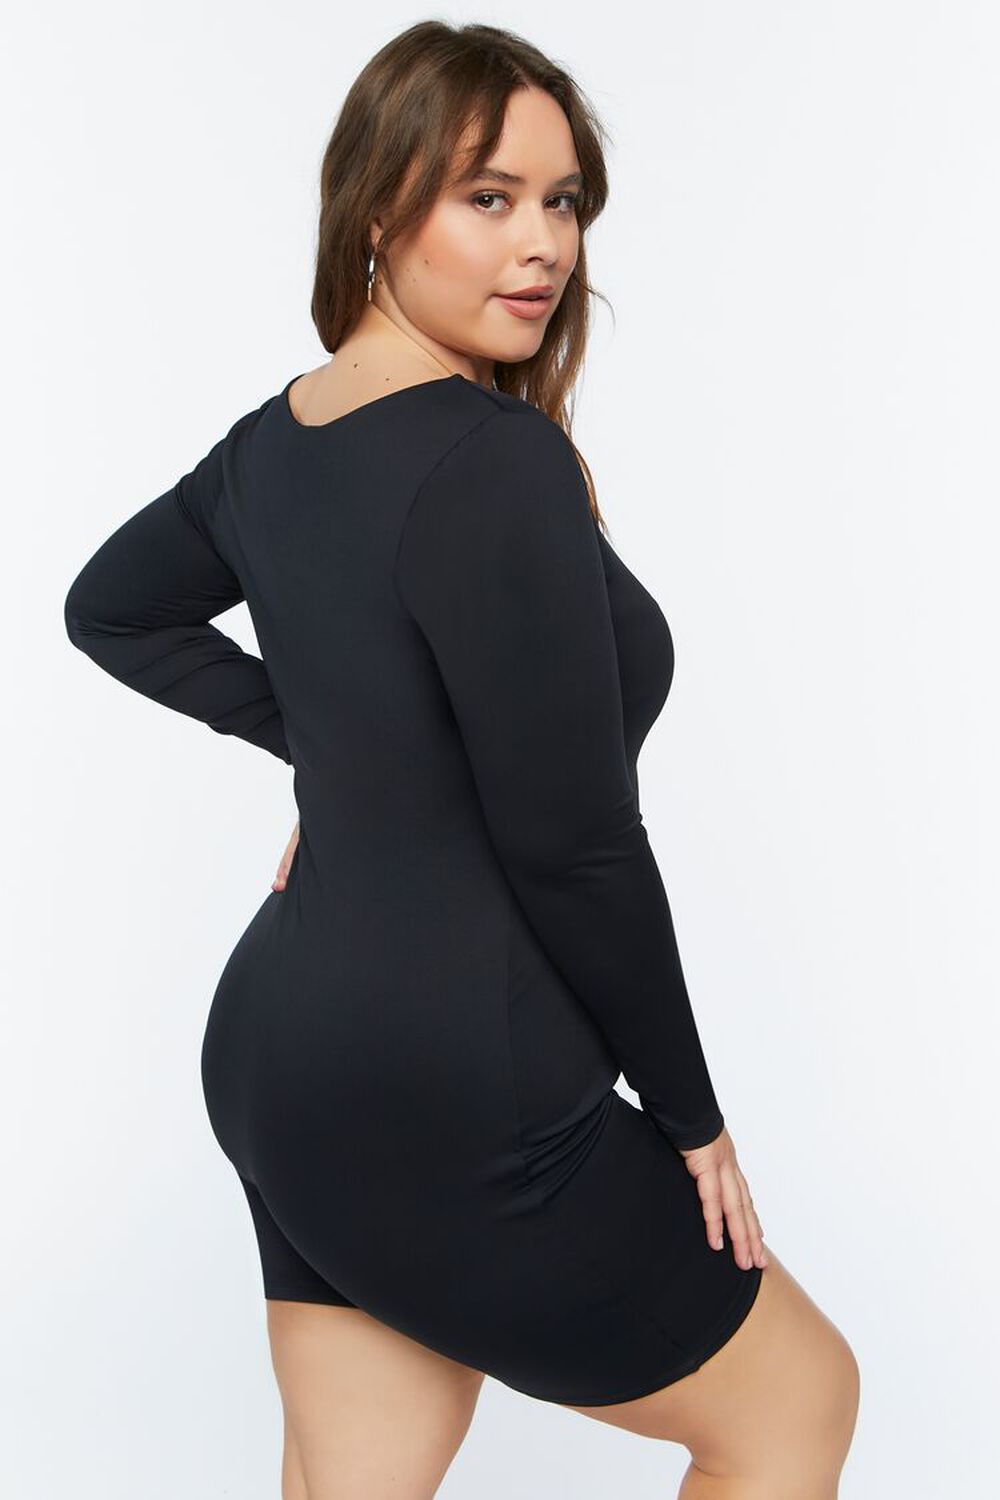 BLACK Plus Size Fitted Scoop-Neck Romper, image 3